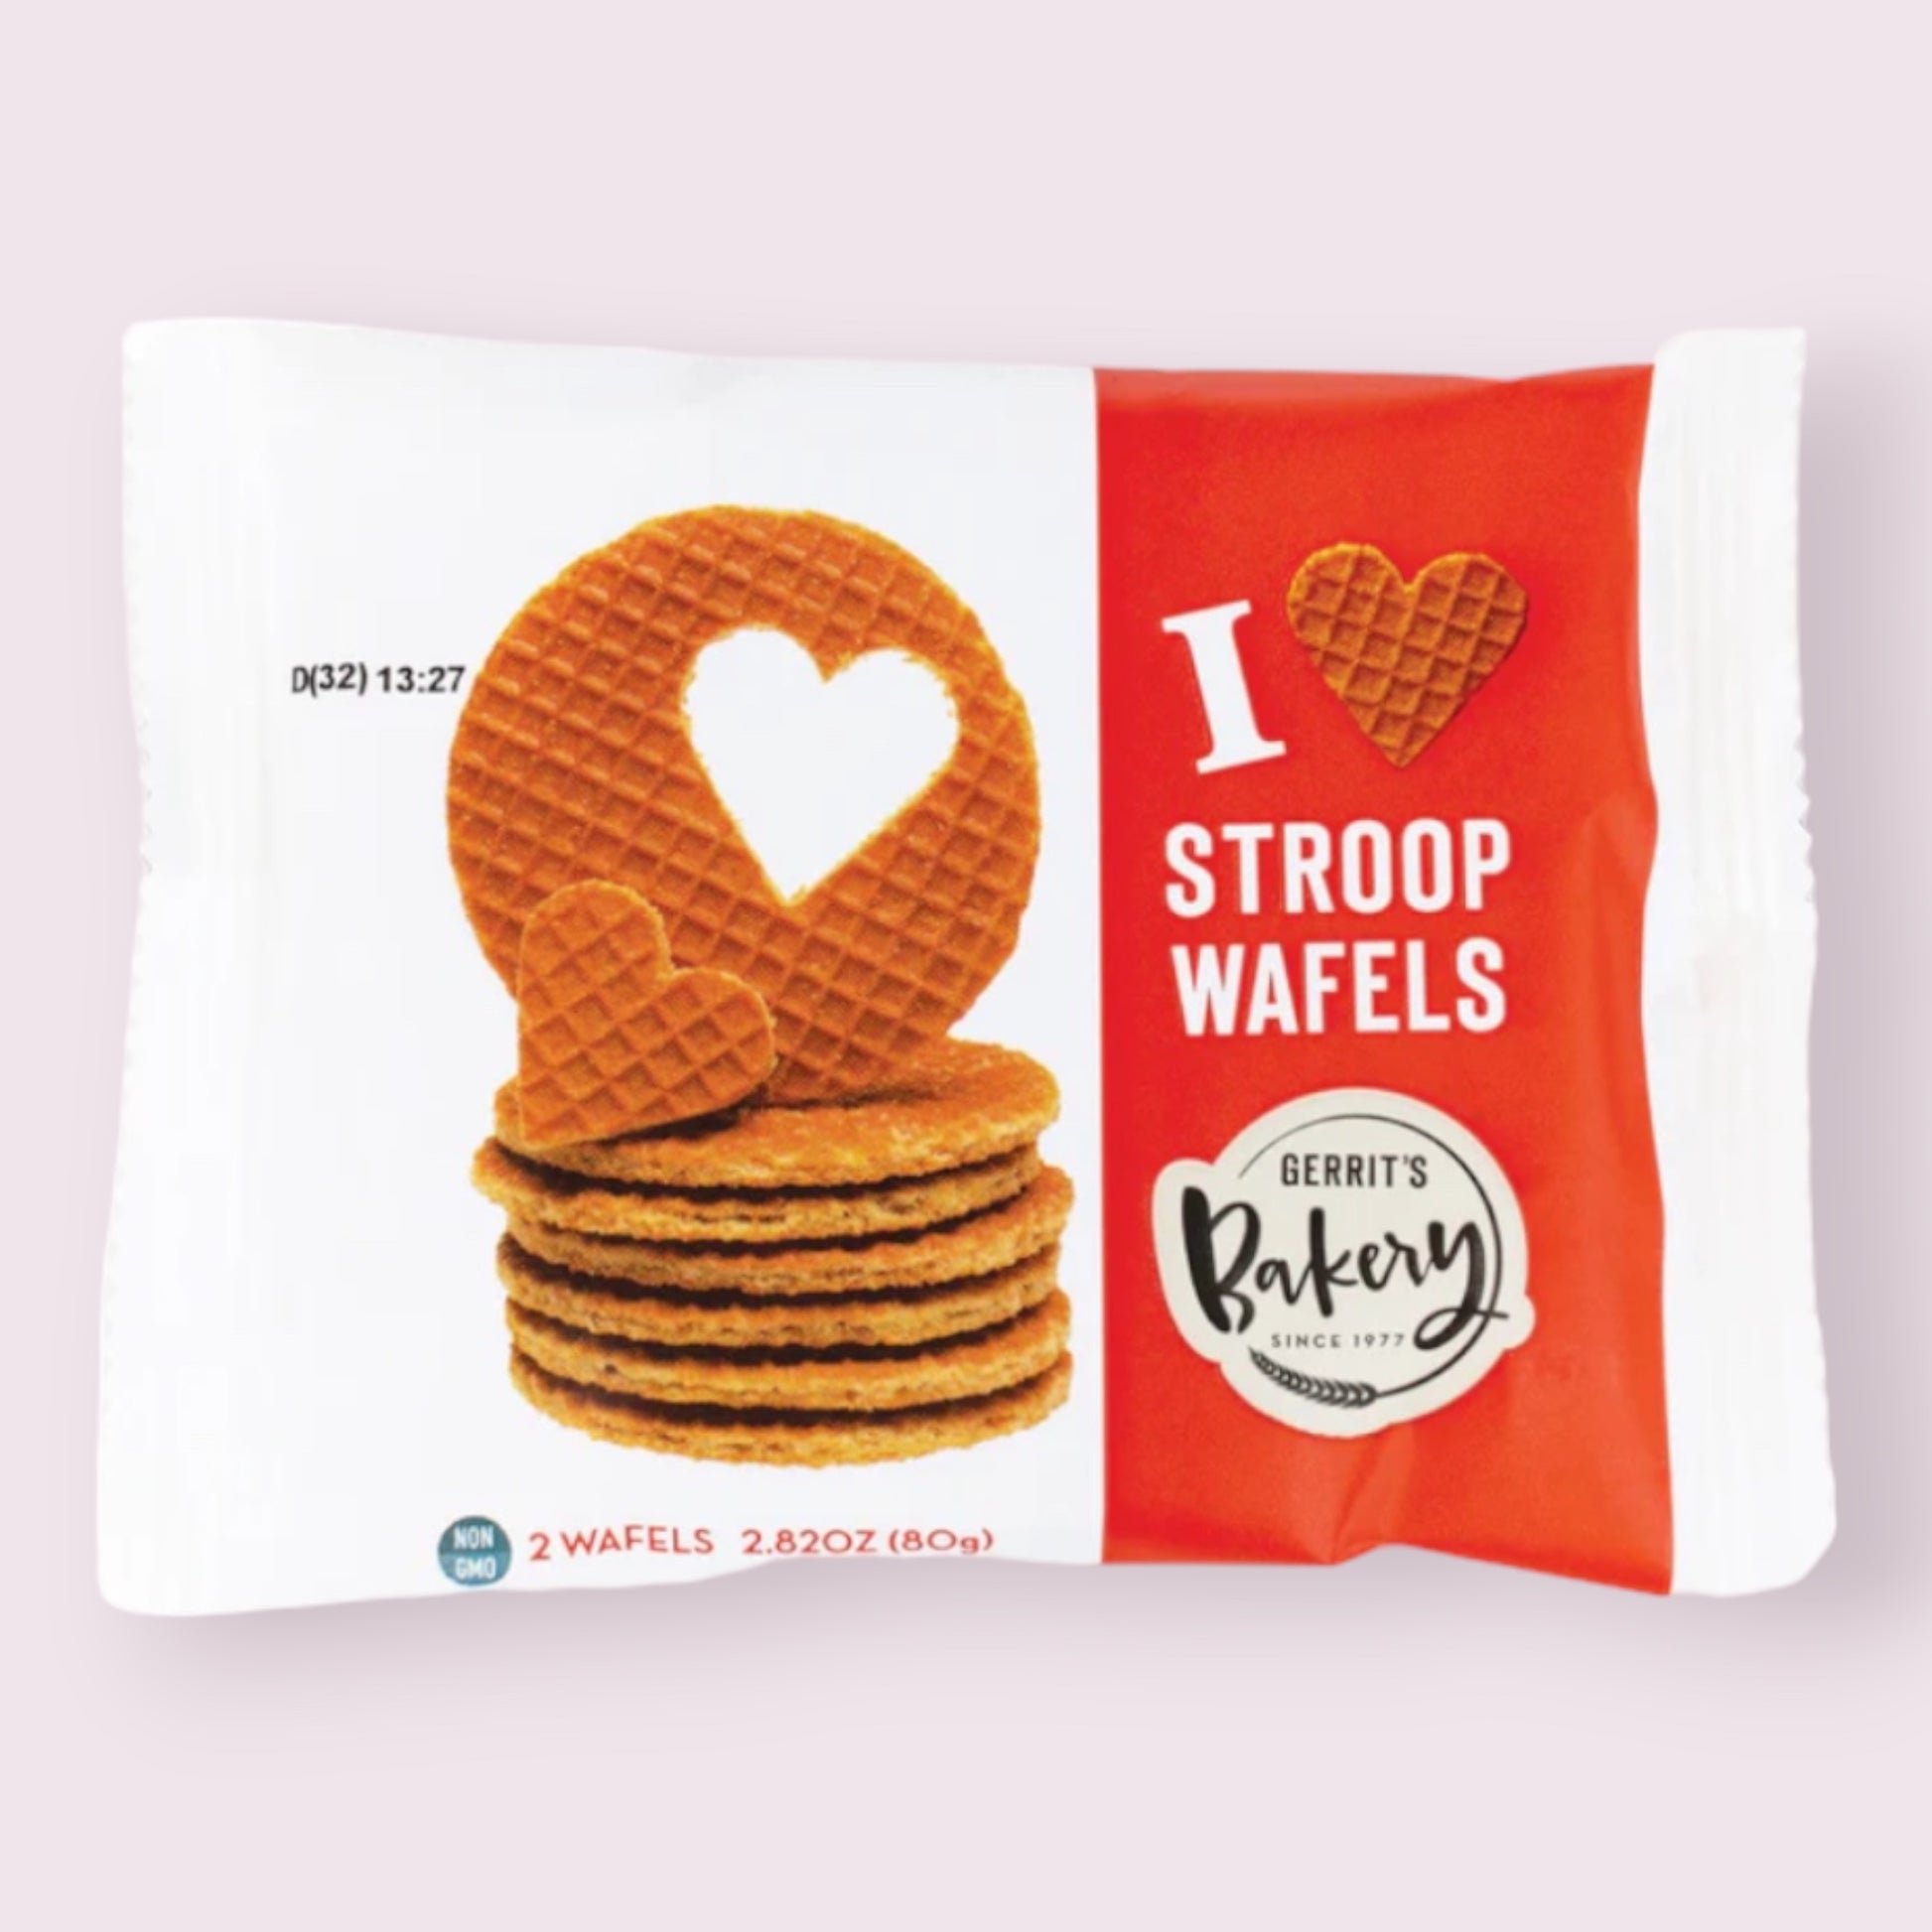 Gerrits Bakery Stroop Wafels Pack  Pixie Candy Shoppe   